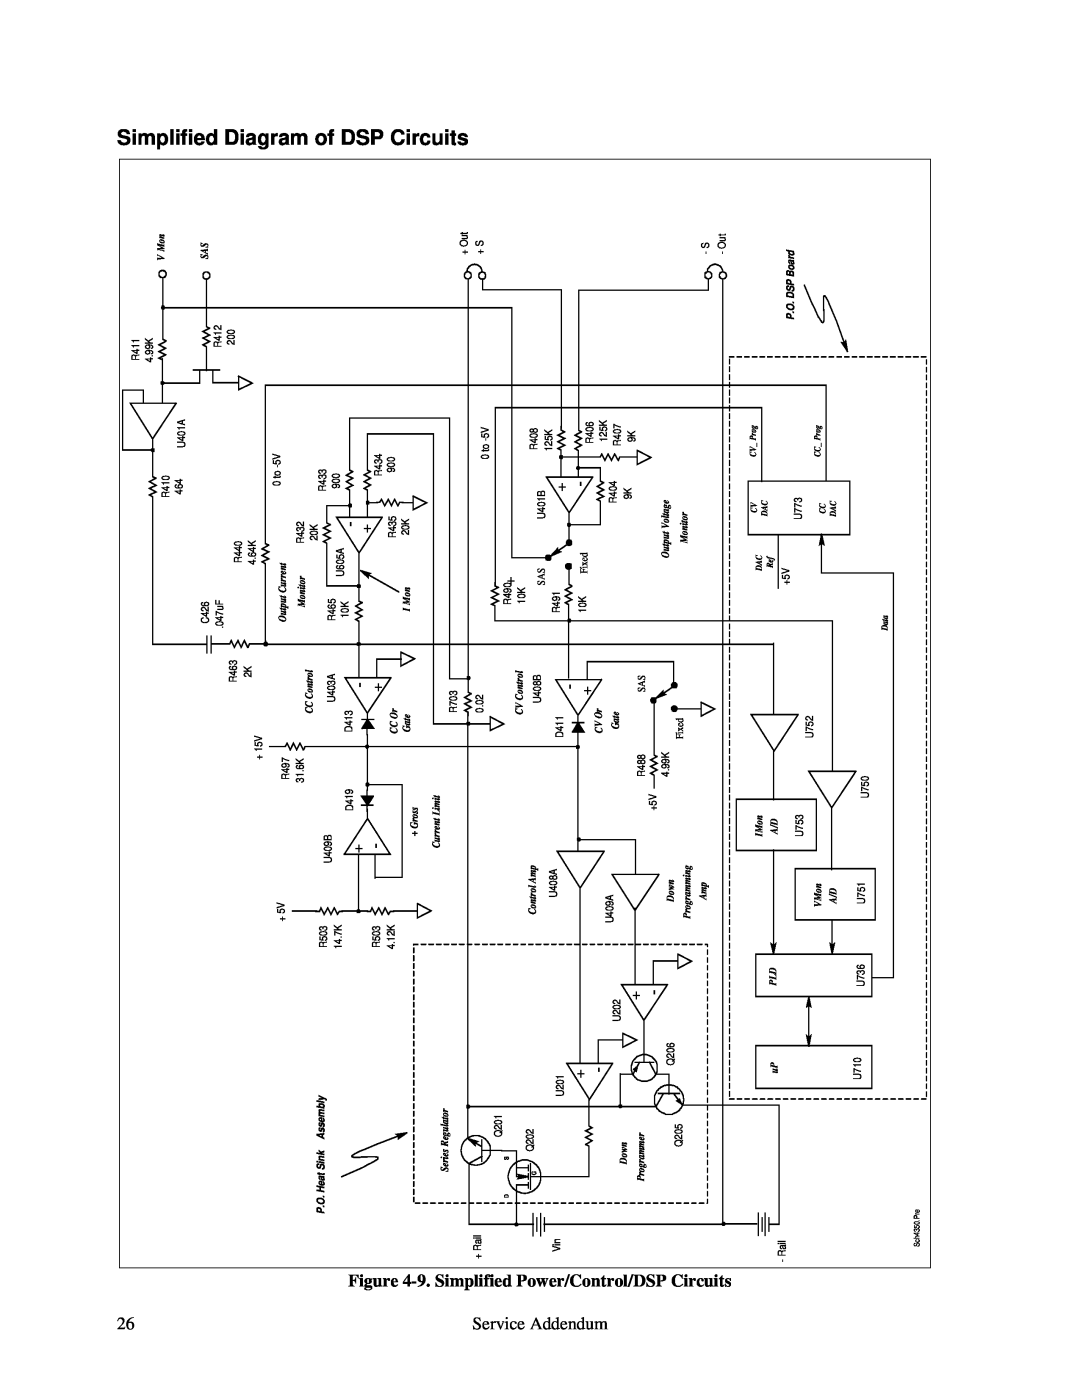 Agilent Technologies E4351B Simplified Diagram of DSP Circuits, 9. Simplified Power/Control/DSP Circuits, Board, P.O. Dsp 